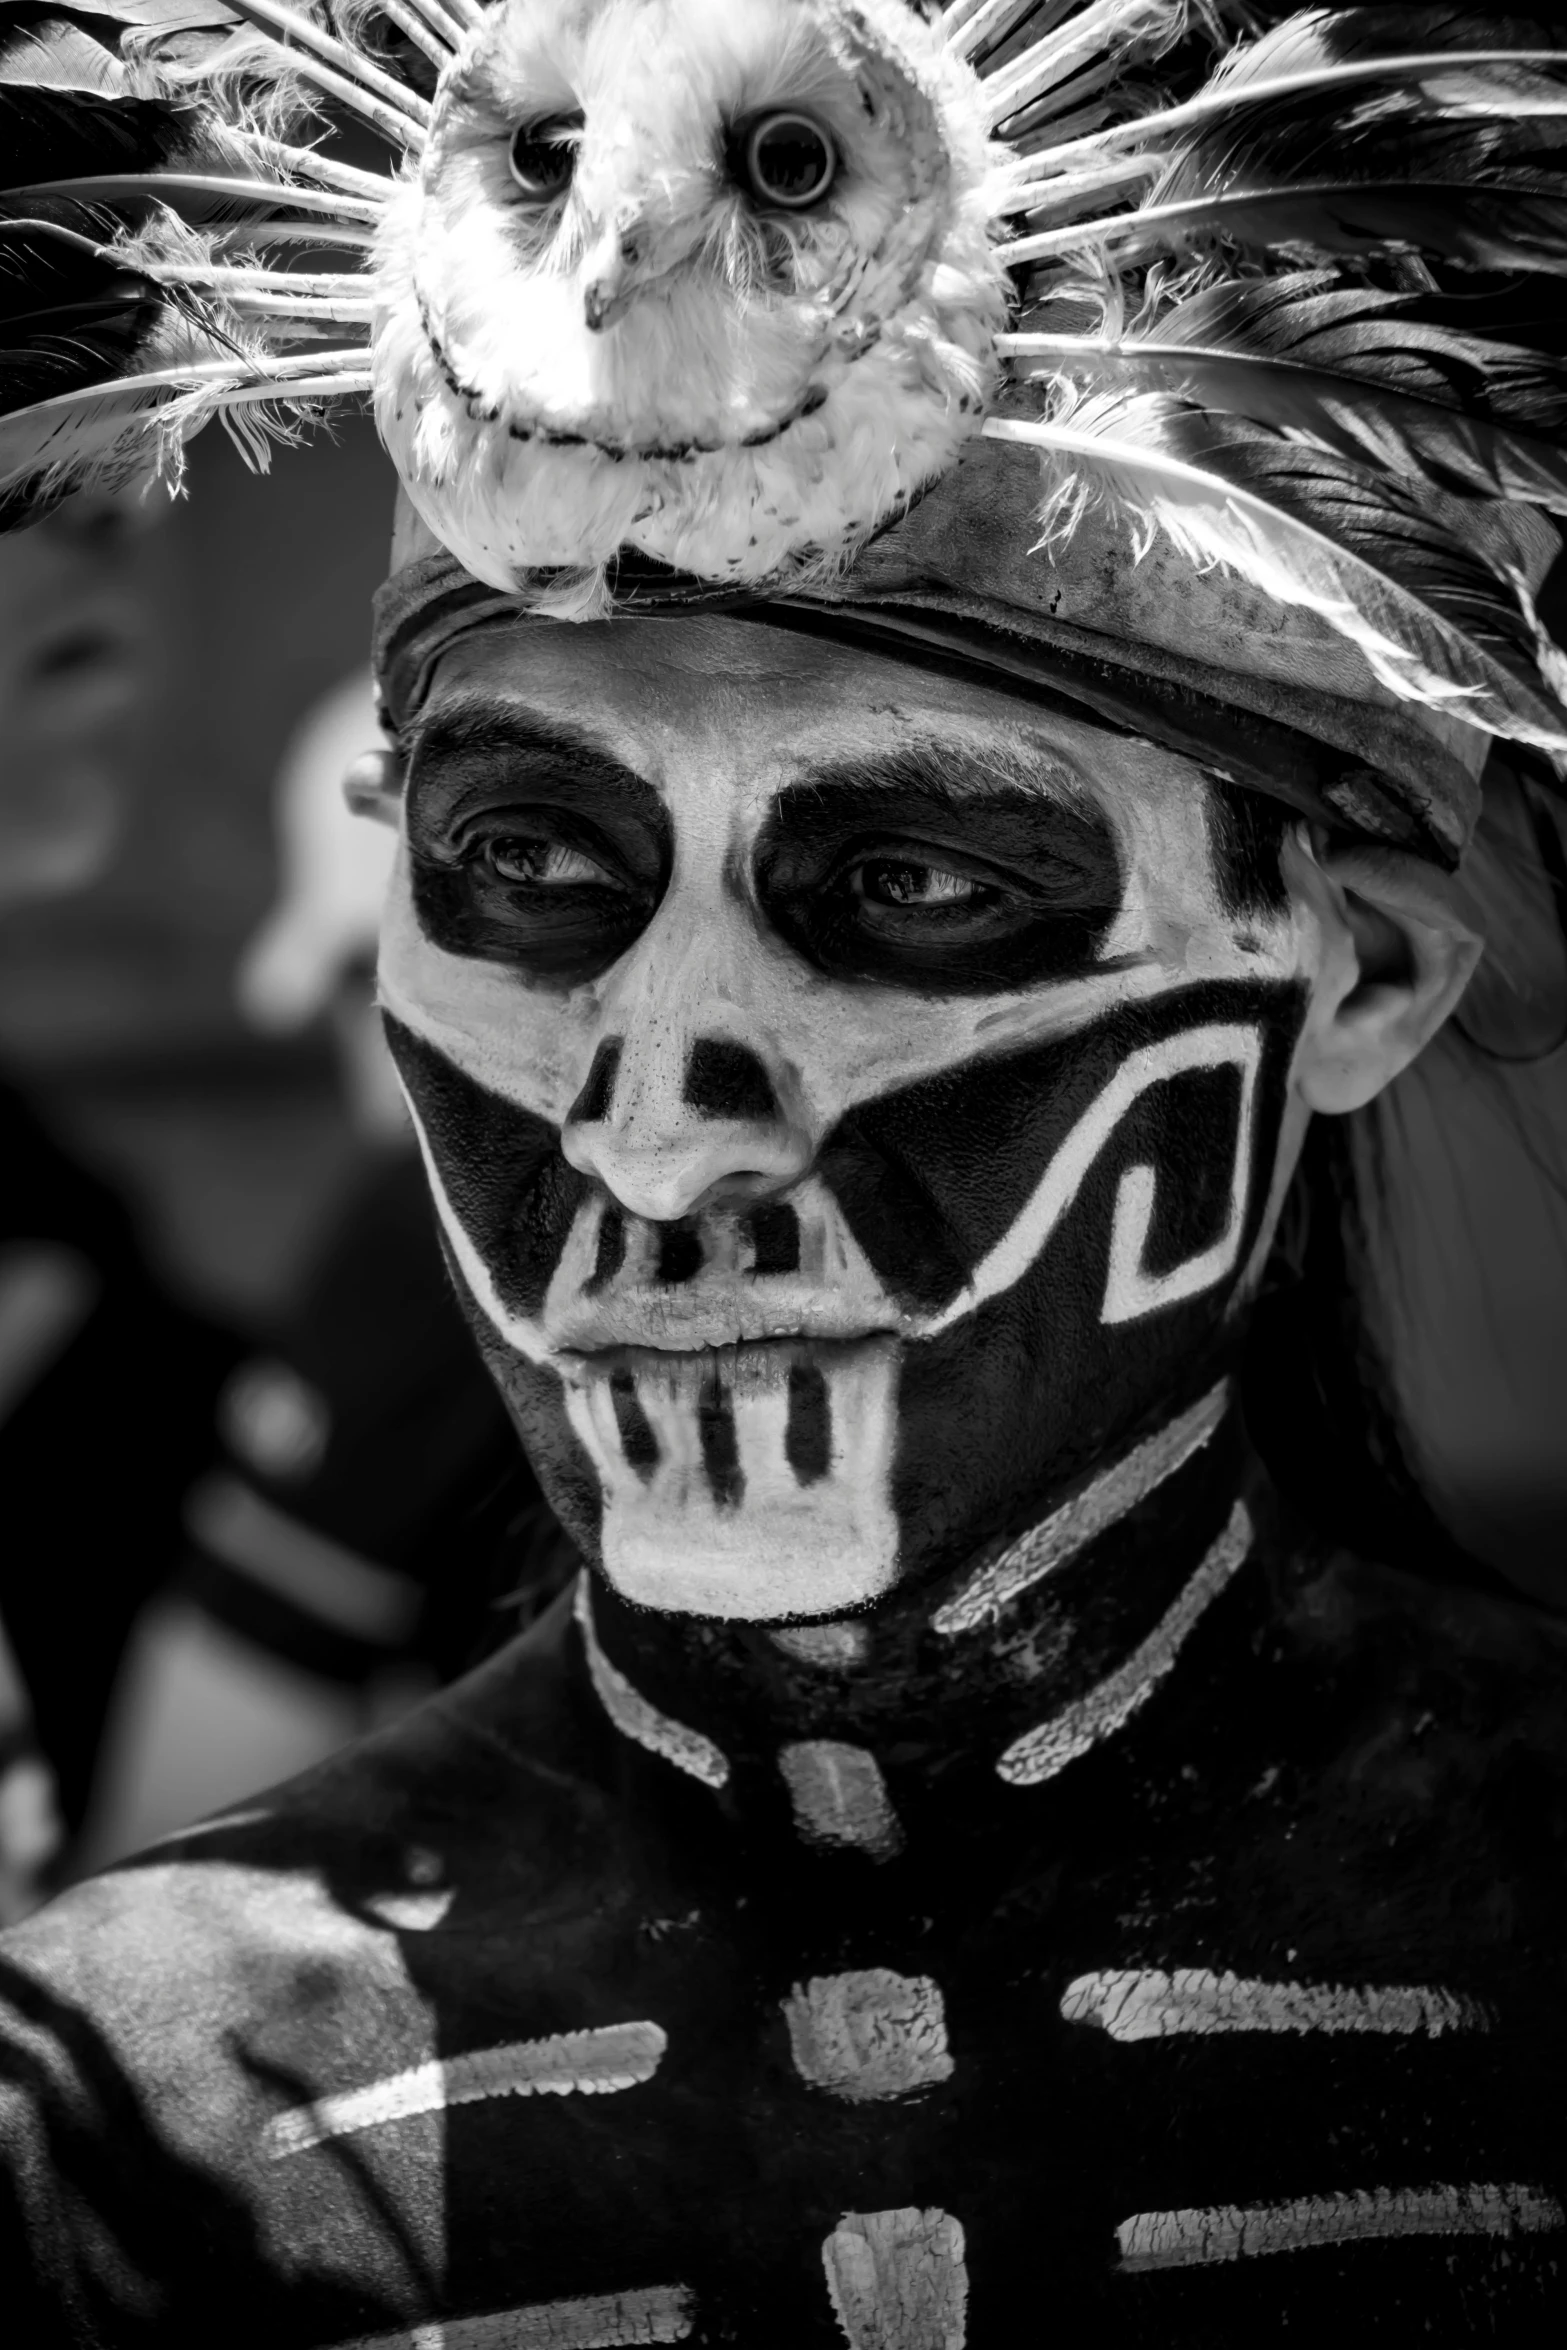 a skull wearing a feather hat with feathers